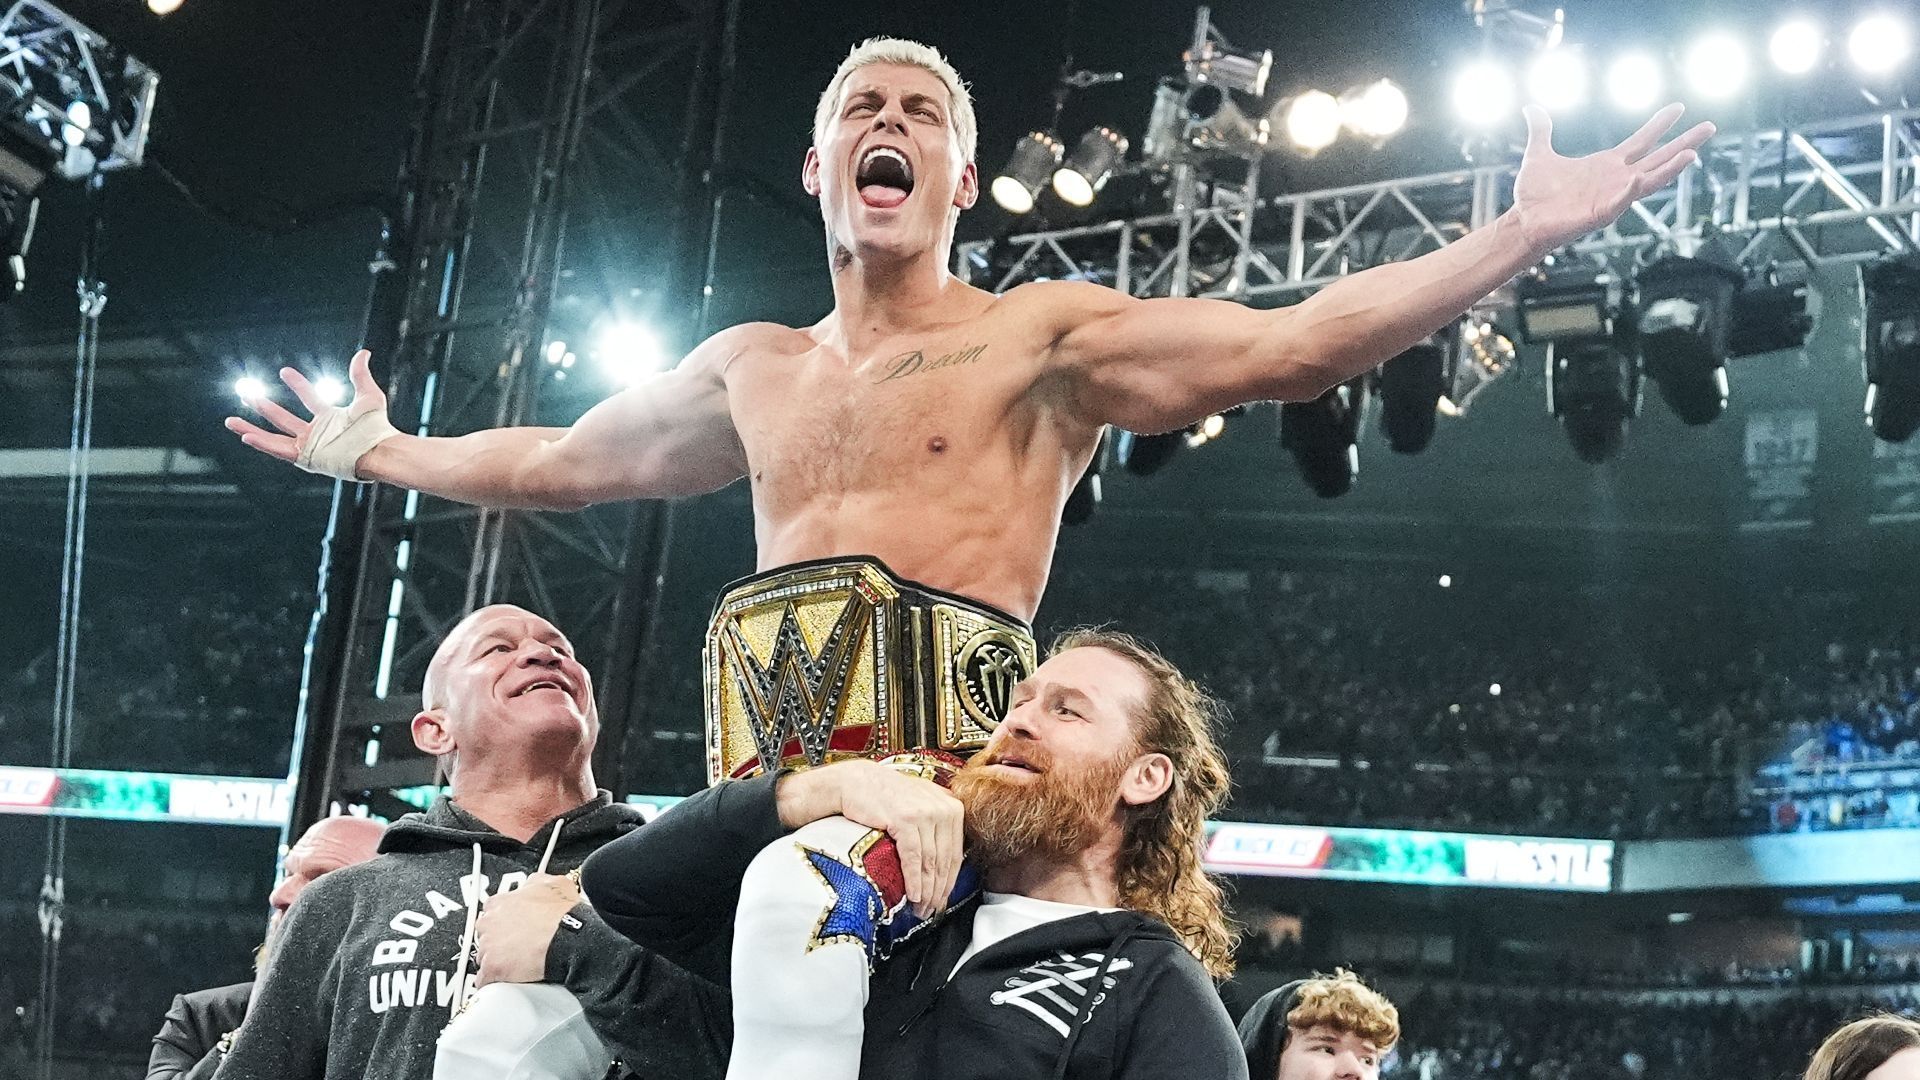 Cody Rhodes celebrating his title win at WrestleMania XL